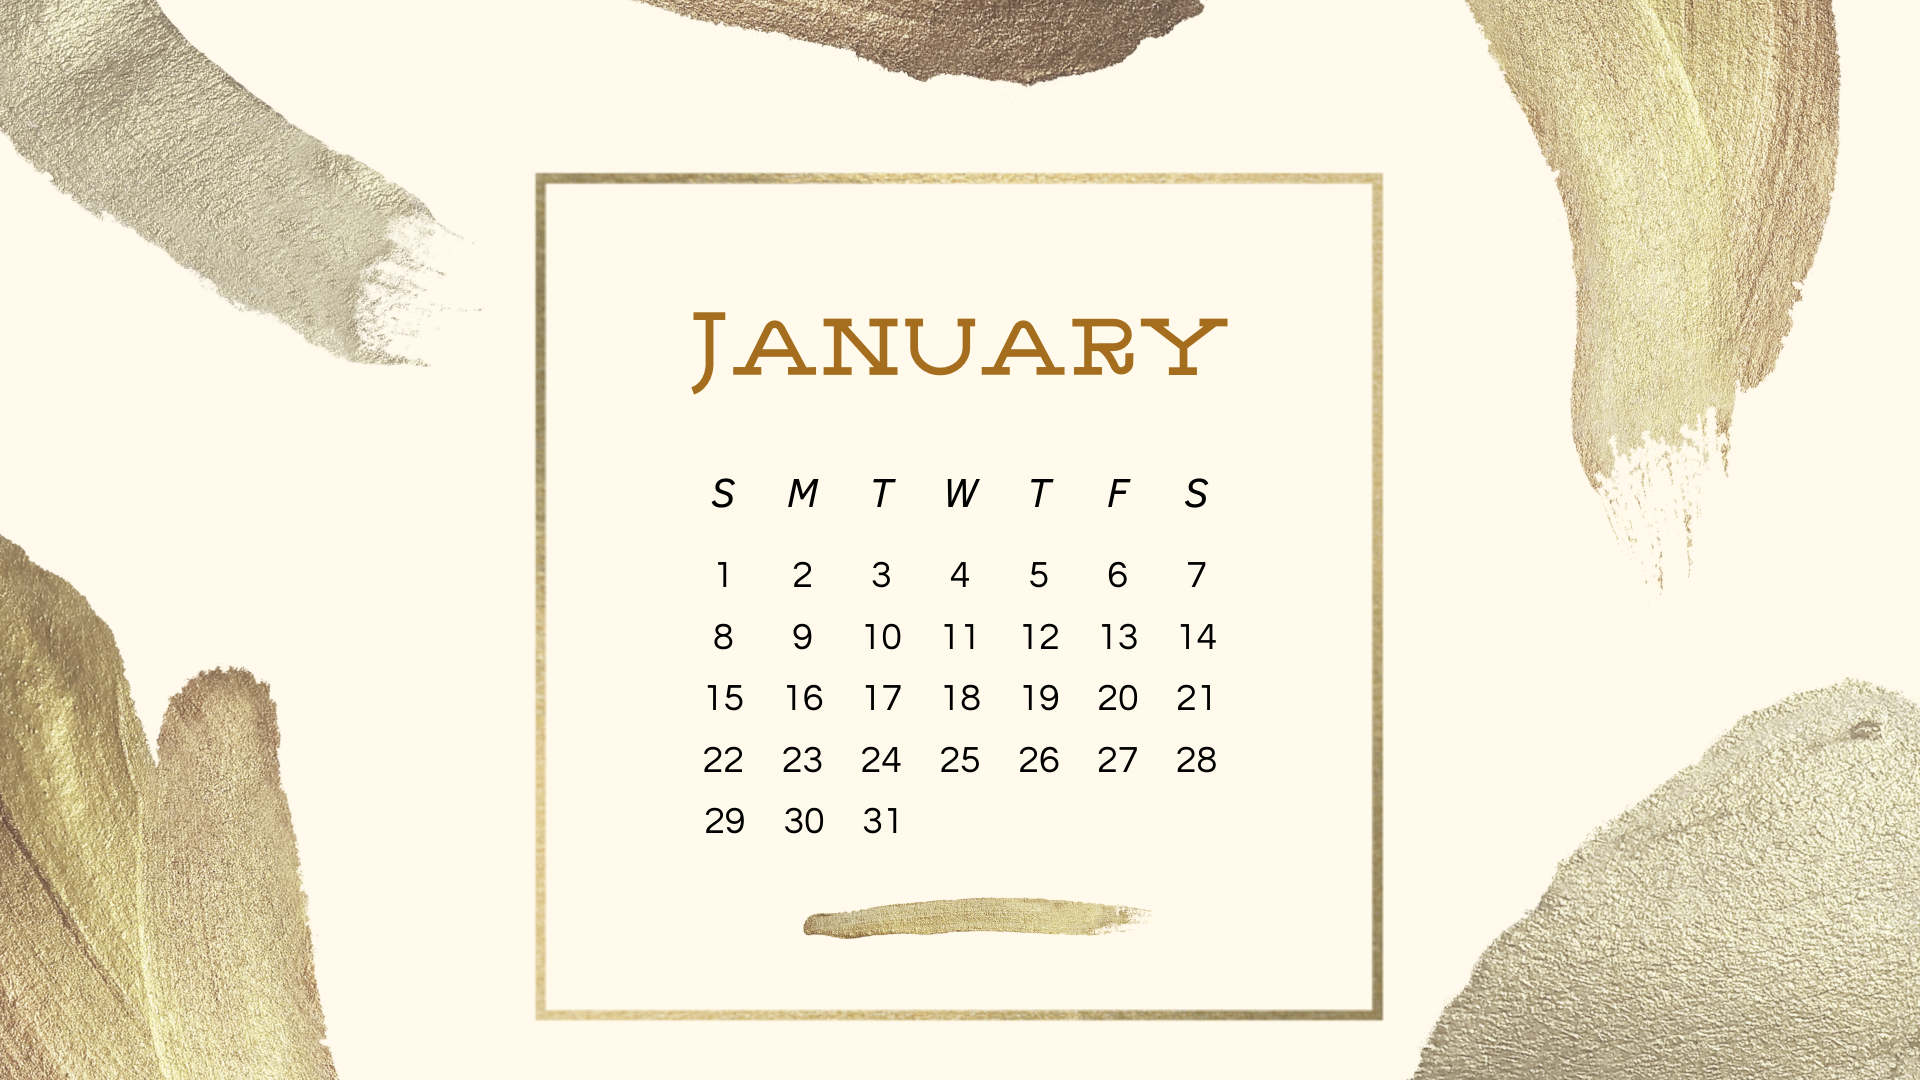 JANUARY 2023 desktop calendar backgrounds;  Here are your free January backgrounds for computers and laptops. Tech freebies for this month!